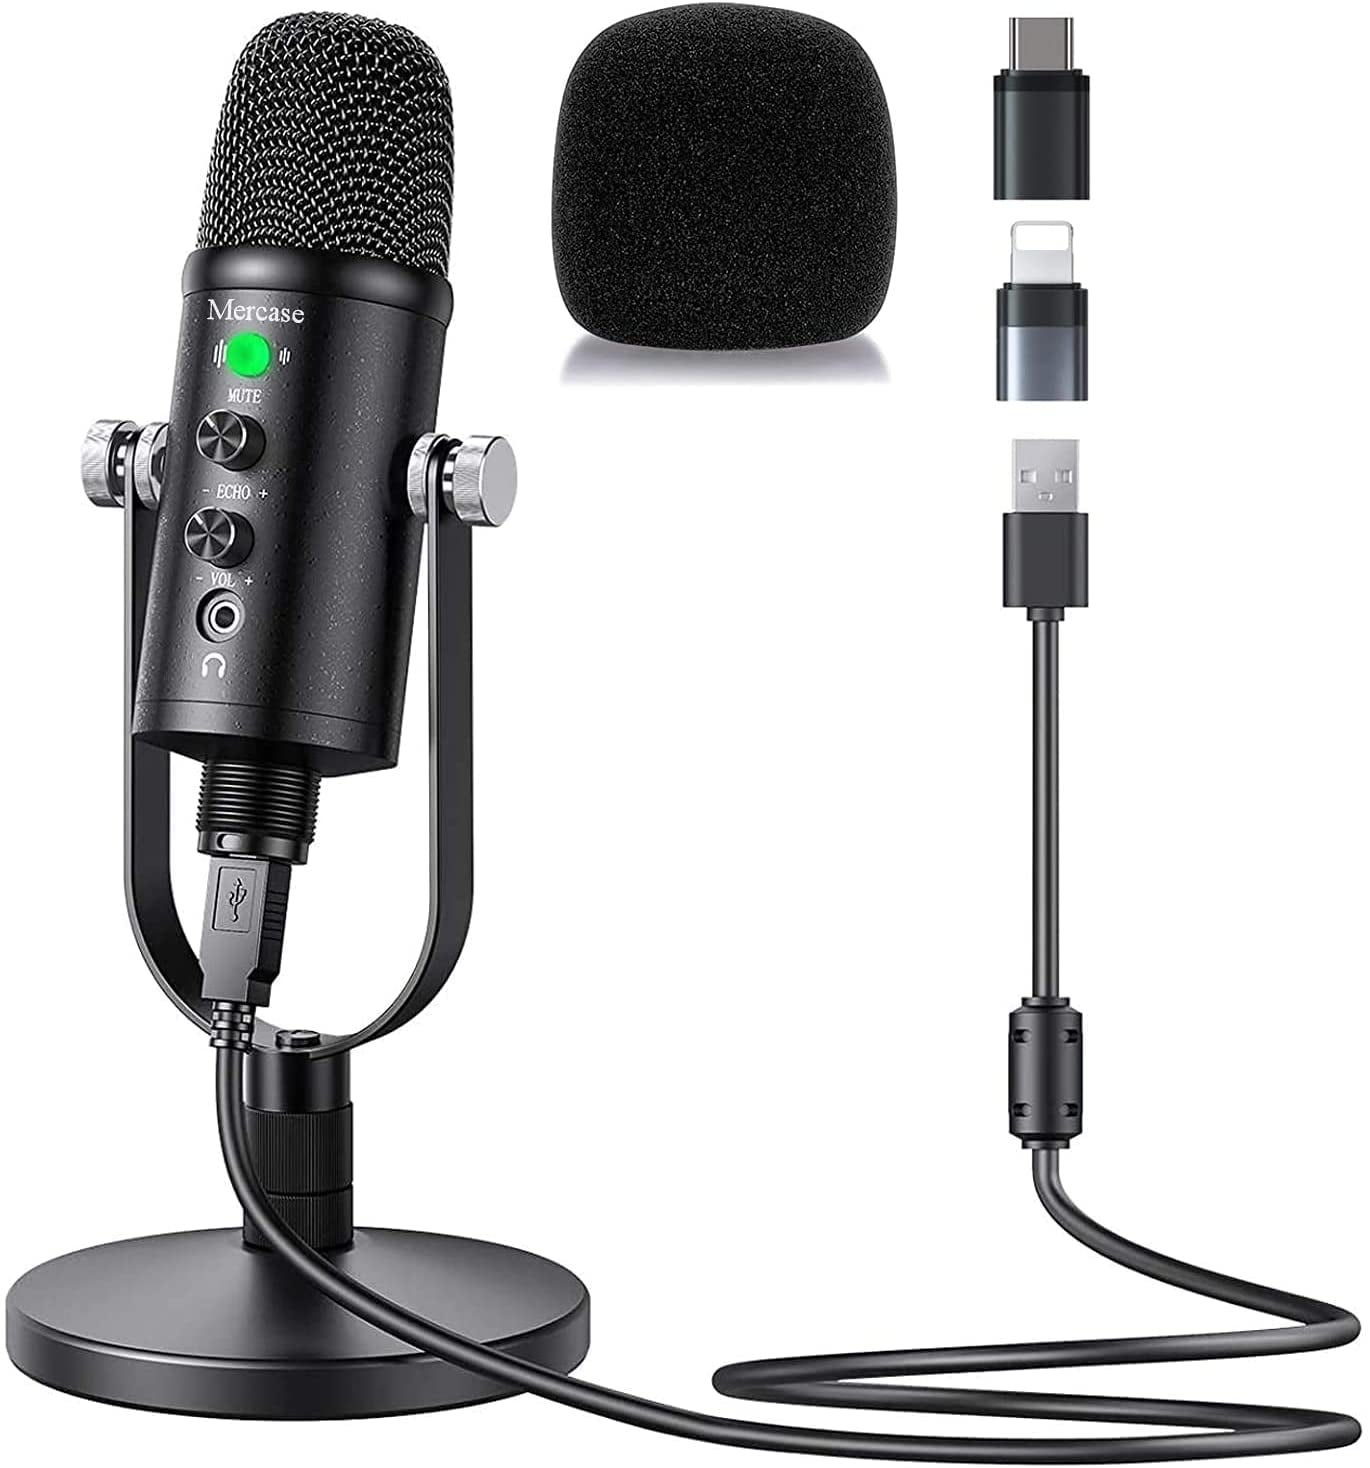 accu klant Uitpakken Mercase USB Condenser Microphone with Noise Cancelling and Reverb Mic for  Recording/Podcasting/Streaming/Gaming, Computer PC/MAC/Ps4/iPhone/iPad/Android  - Walmart.com